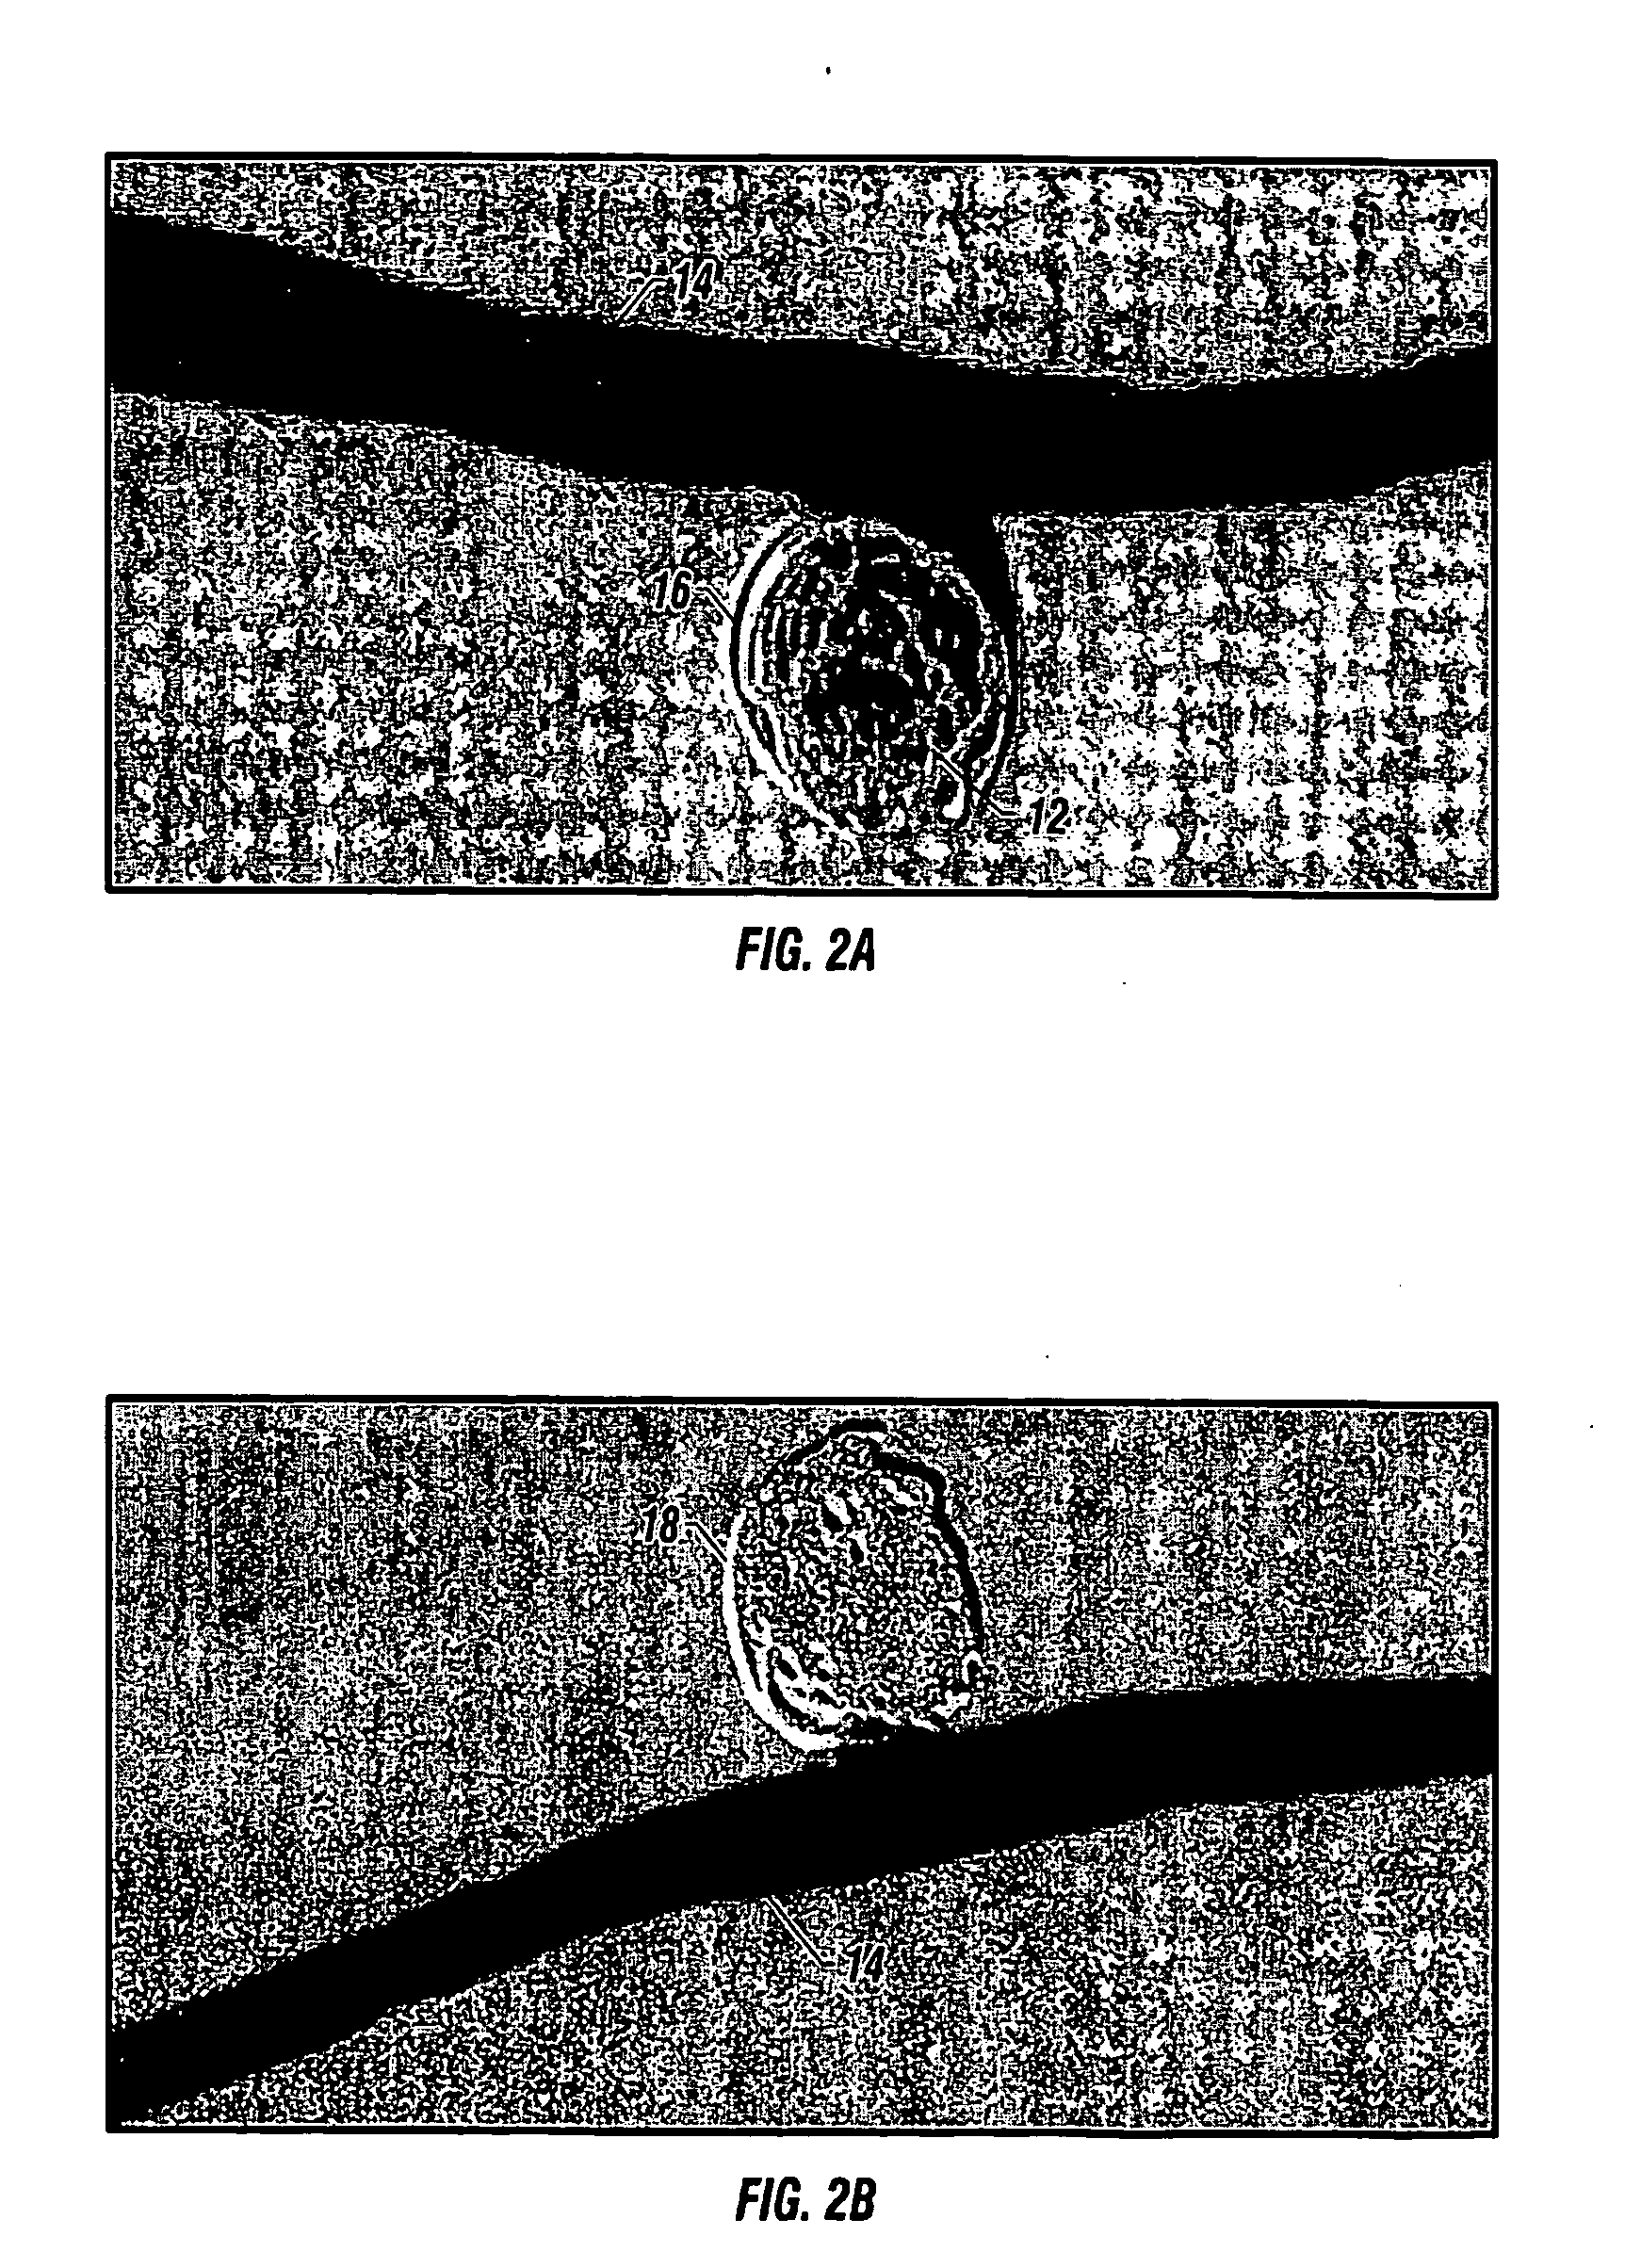 Bioabsorbable polymeric implants and a method of using the same to create occlusions